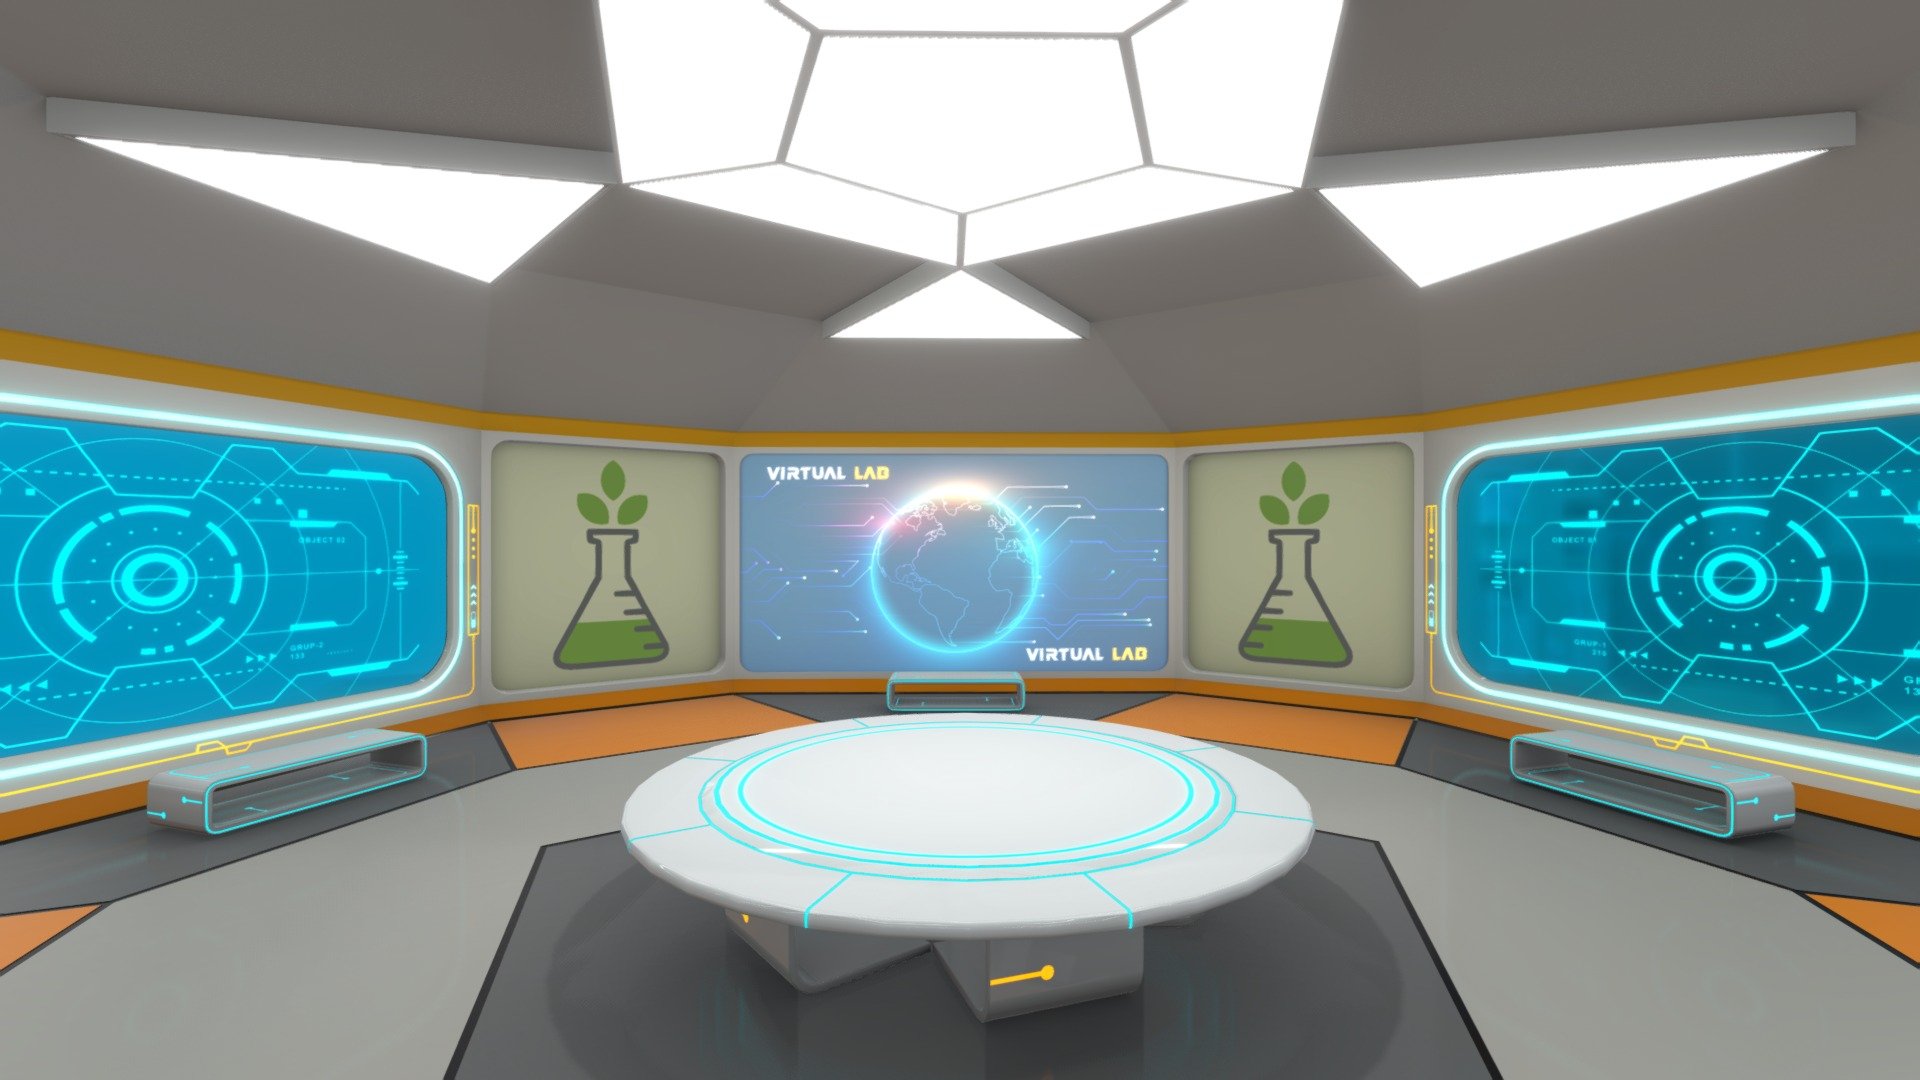 Scifi Virtual Laboratory

This is the low poly Scifi VR lab set with the high quality of texture and render.
You can use this scene for the purpose of VR projects and simulators etc.

All the models are Low Poly and fully optimized &amp; organized for better performance in gaming devices like
Mobile, AR/VR ( head mount devices ) and PC.

Request: Your time and feedback is greatly appreciated and also help me continue
developing asset in this style.

If you have any quaries about this Package please contact on given email id.
chandansingh512@gmail.com
cgwings812@gmail.com - Scifi_Lab - Buy Royalty Free 3D model by cgwings (@chandansingh512) 3d model